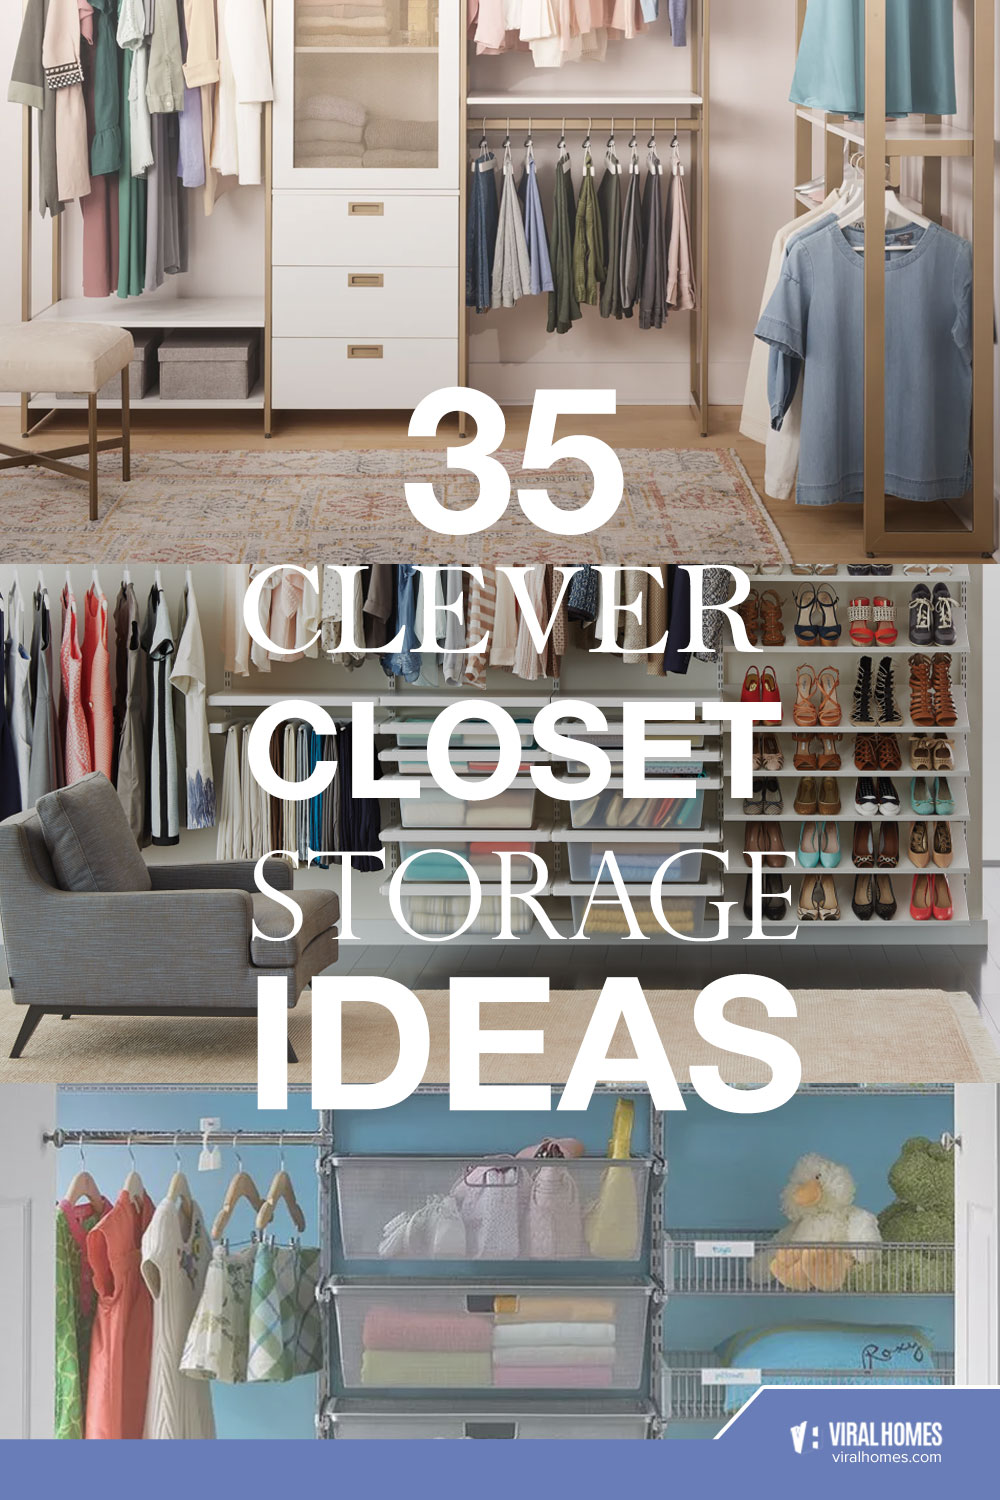 Closet Storage Ideas To Add More Space For Your Stuff